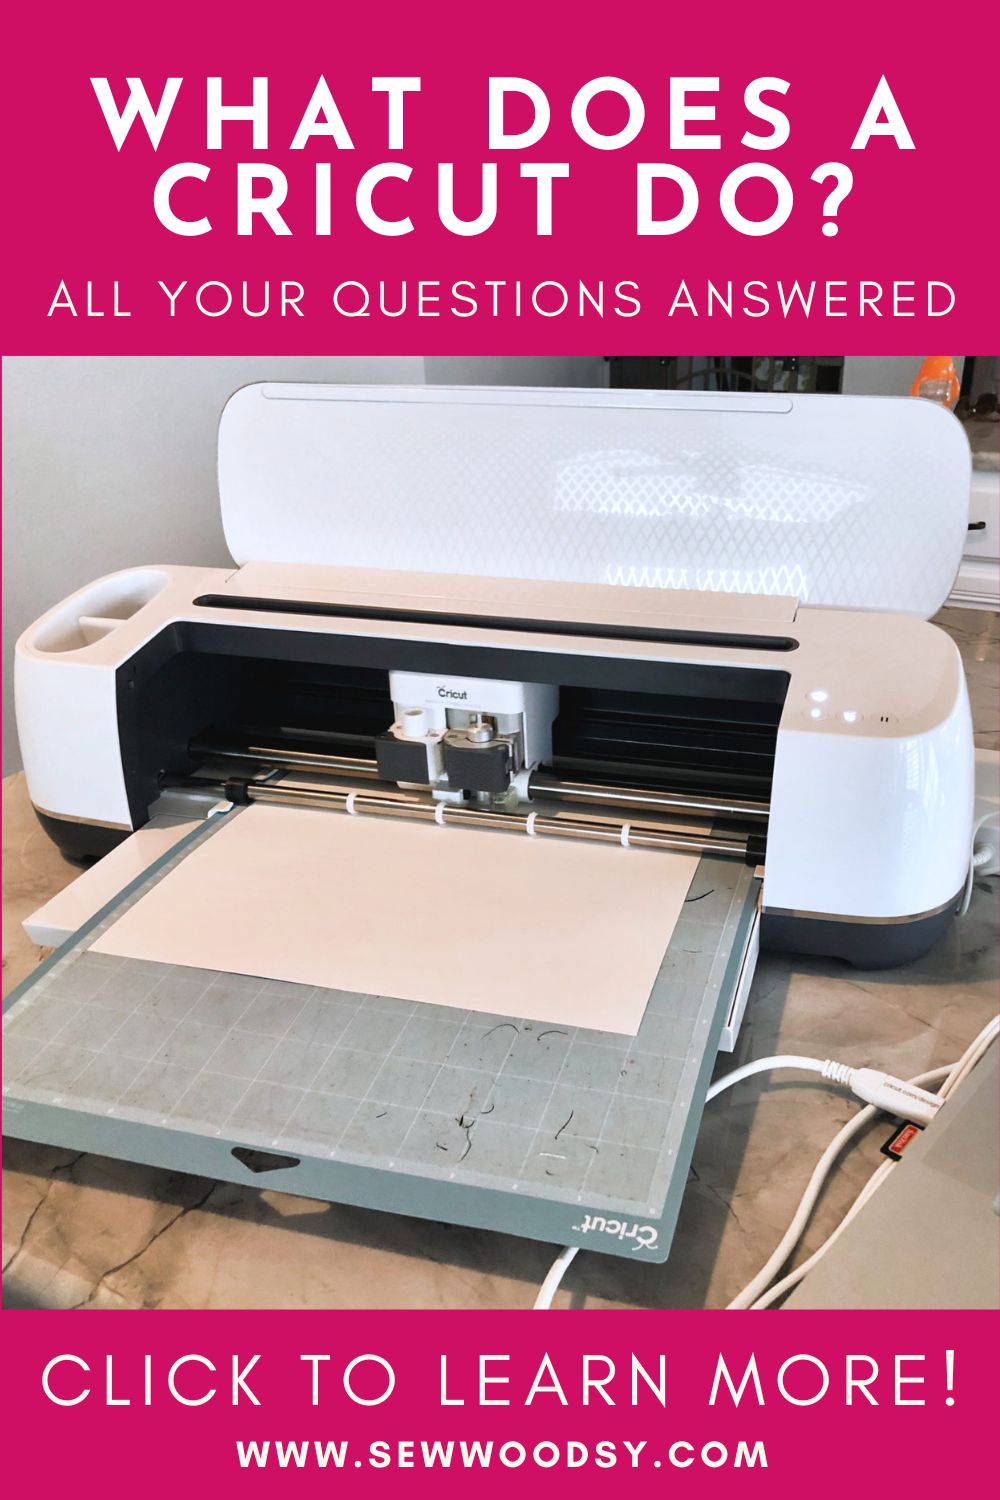 White Cricut machine with blue mat and text on image for Pinterest.